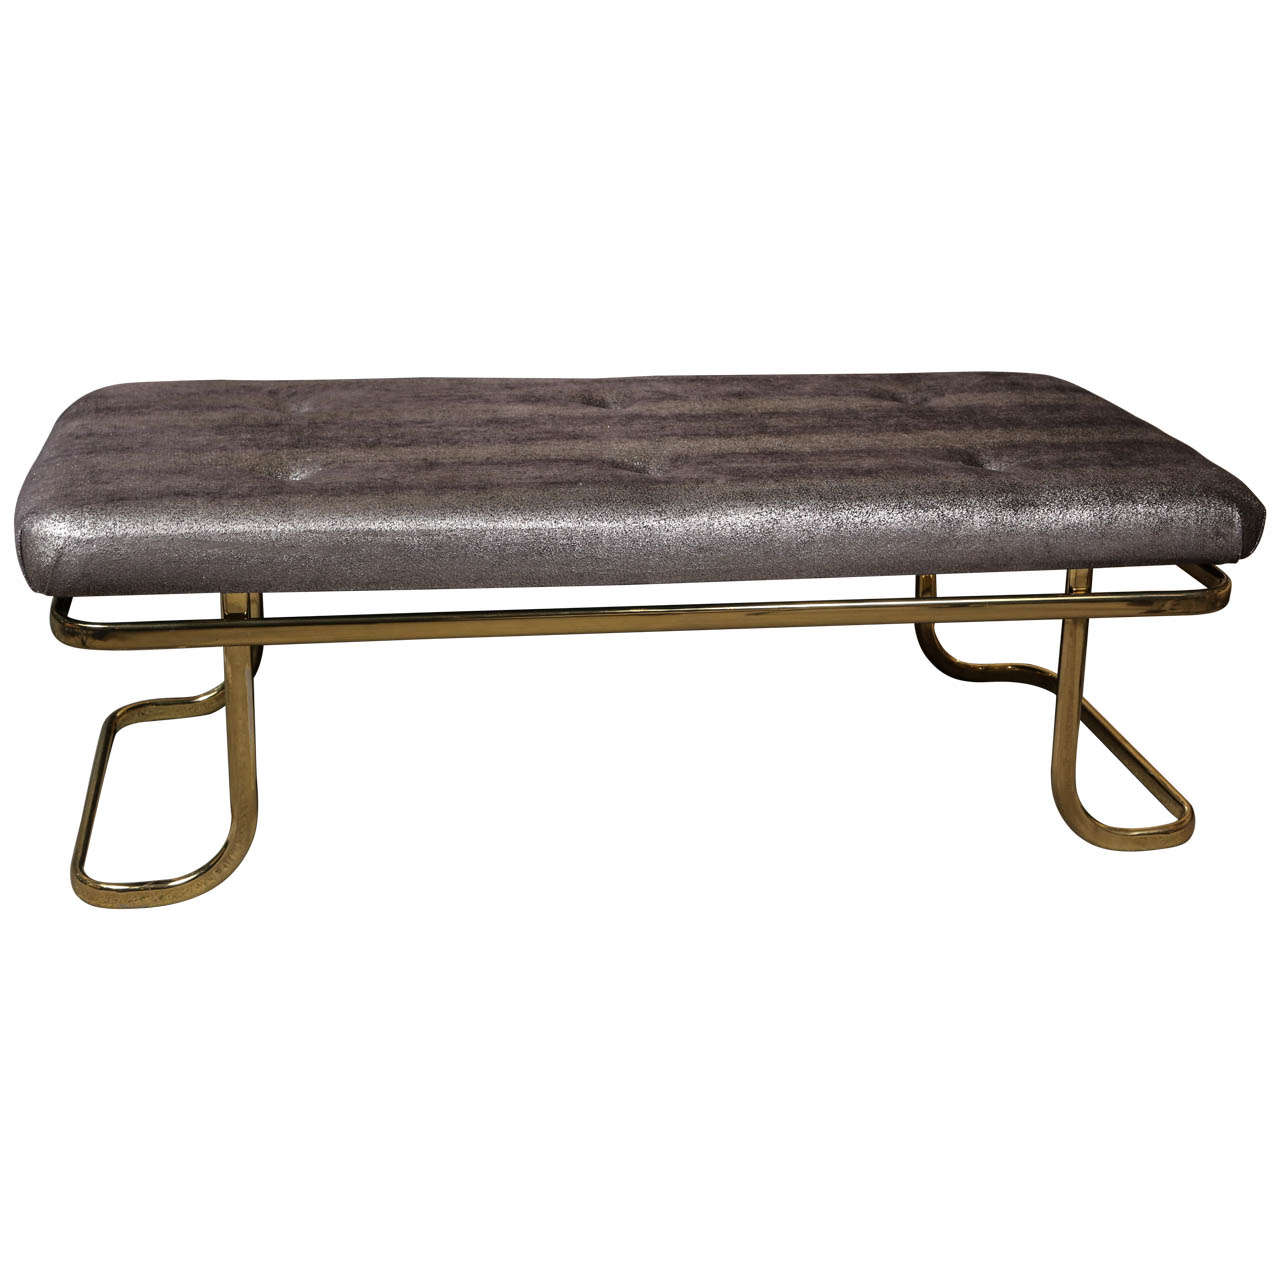 Brass bench with Luxurious metallic upholstery fabric